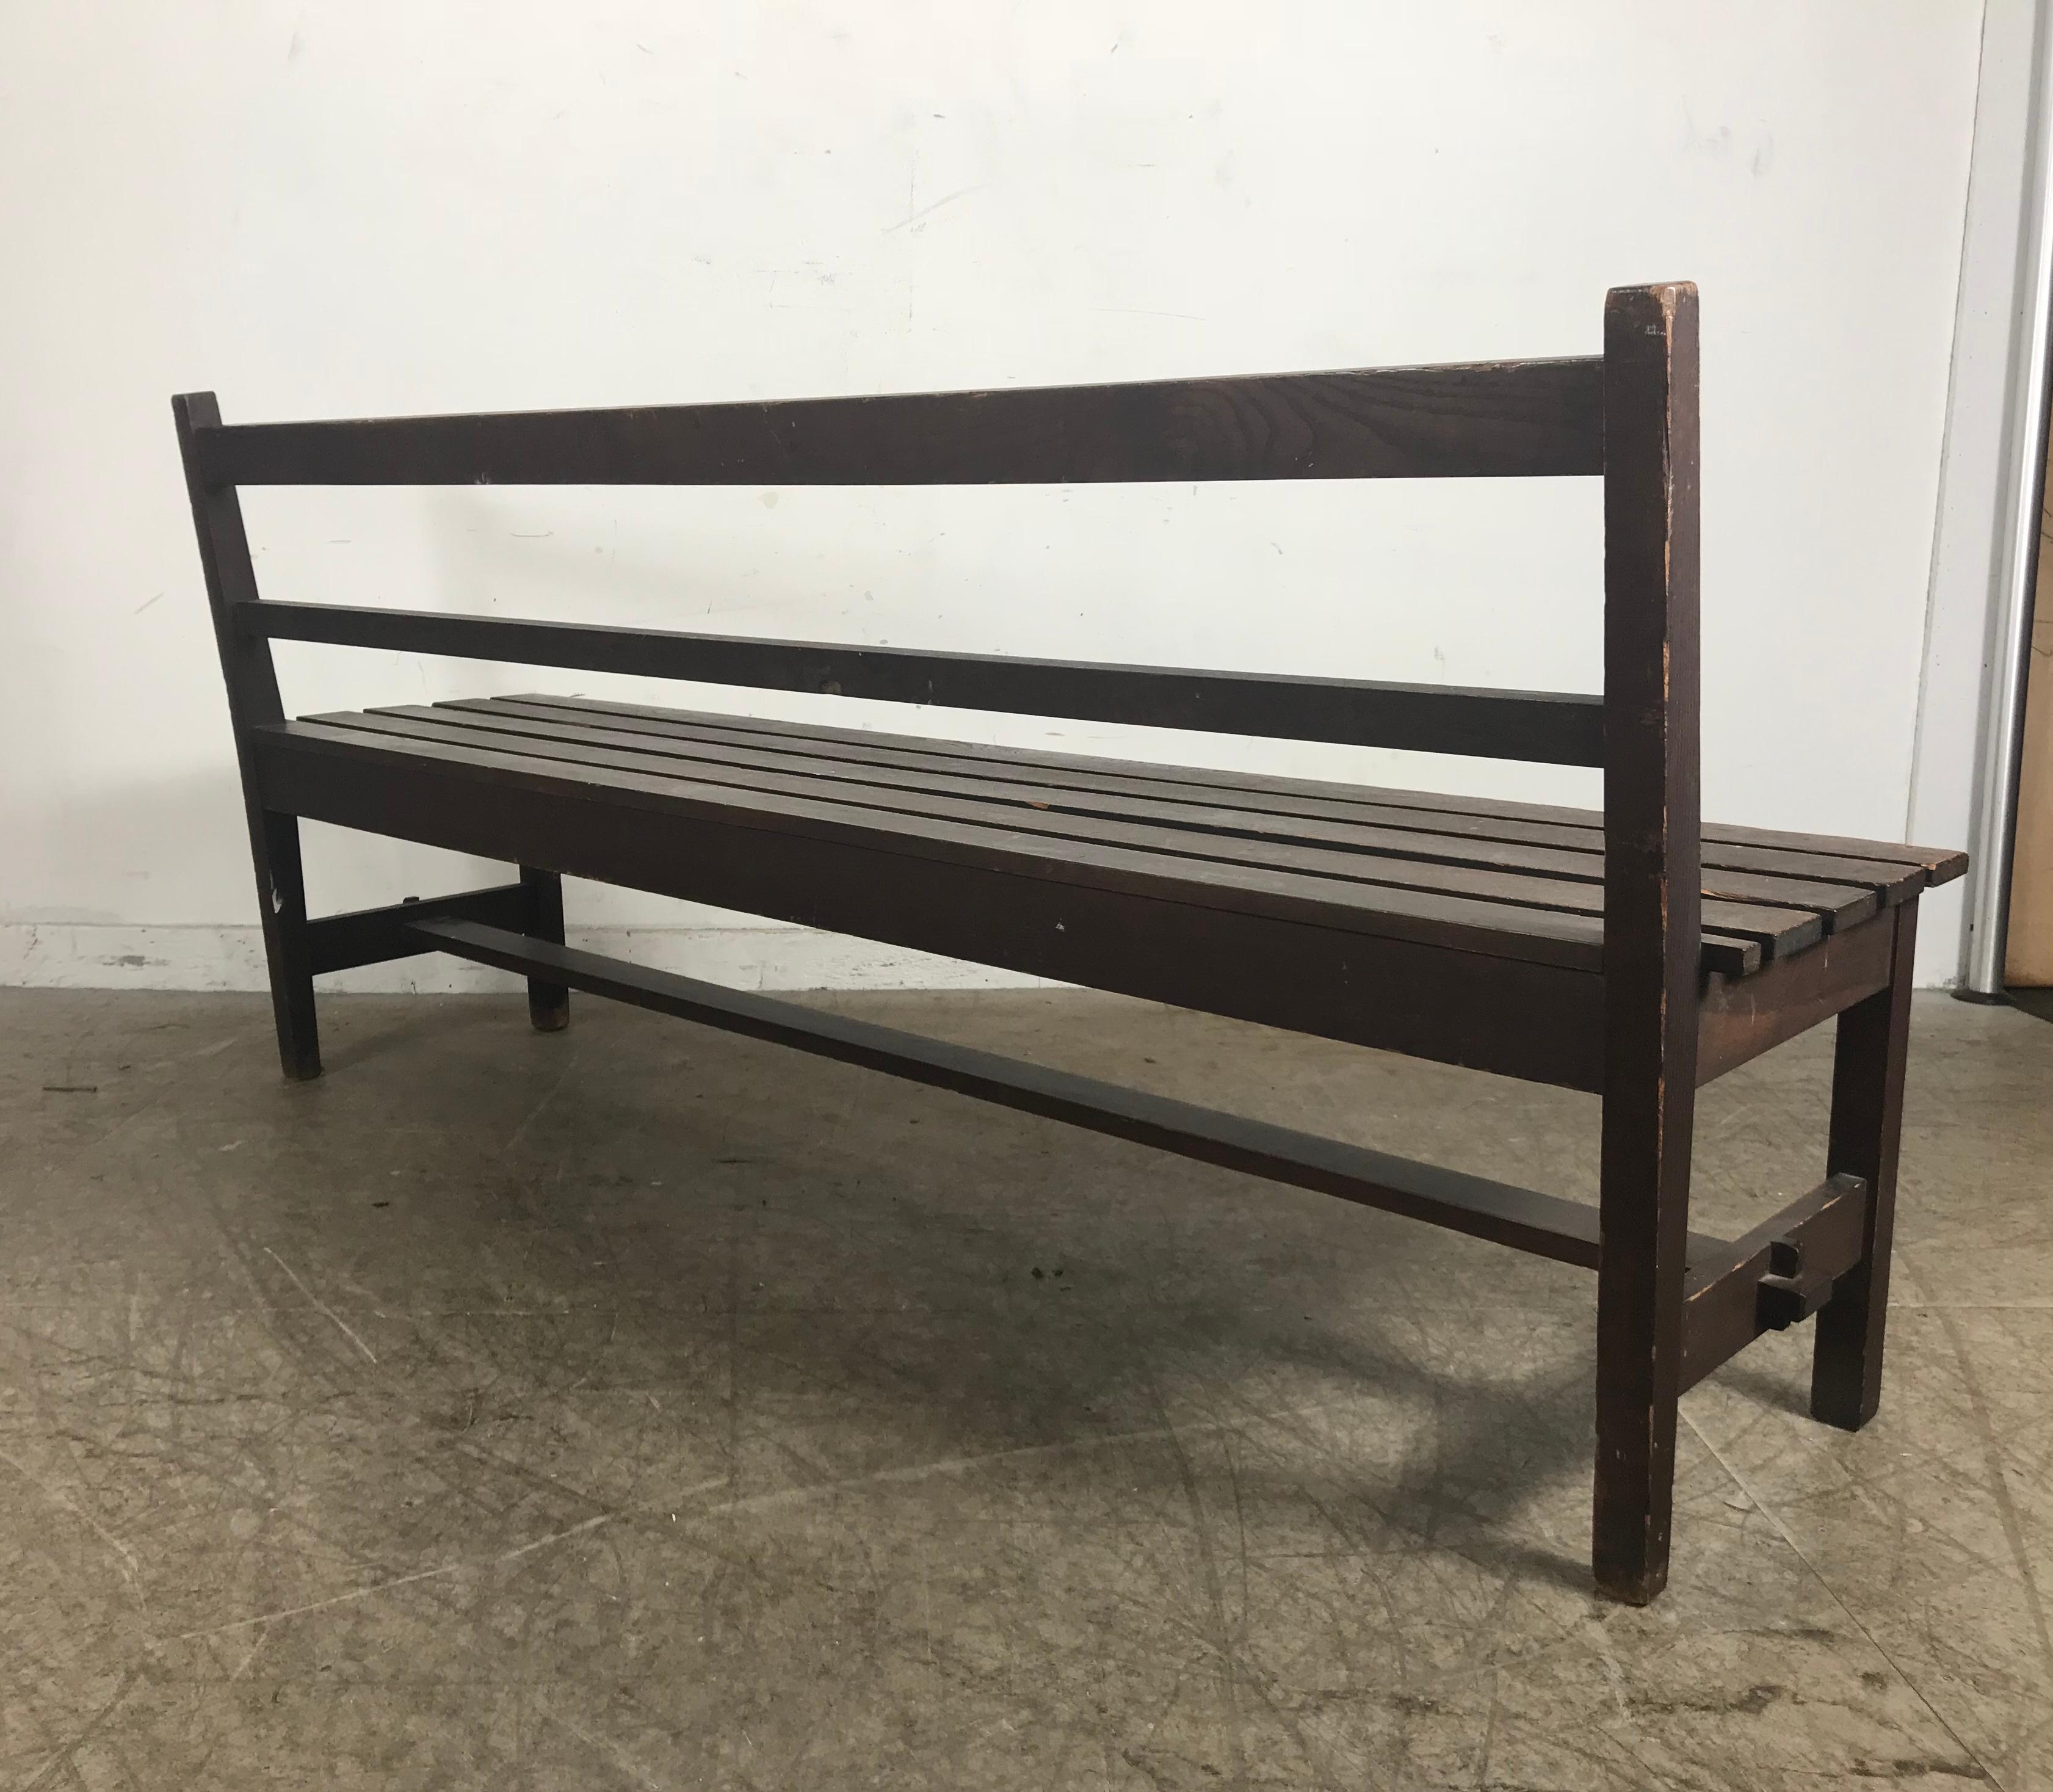 Arts and Crafts Rare Pair of Roycroft Oak Benches, Inventory Number from the Inn, circa 1905 For Sale